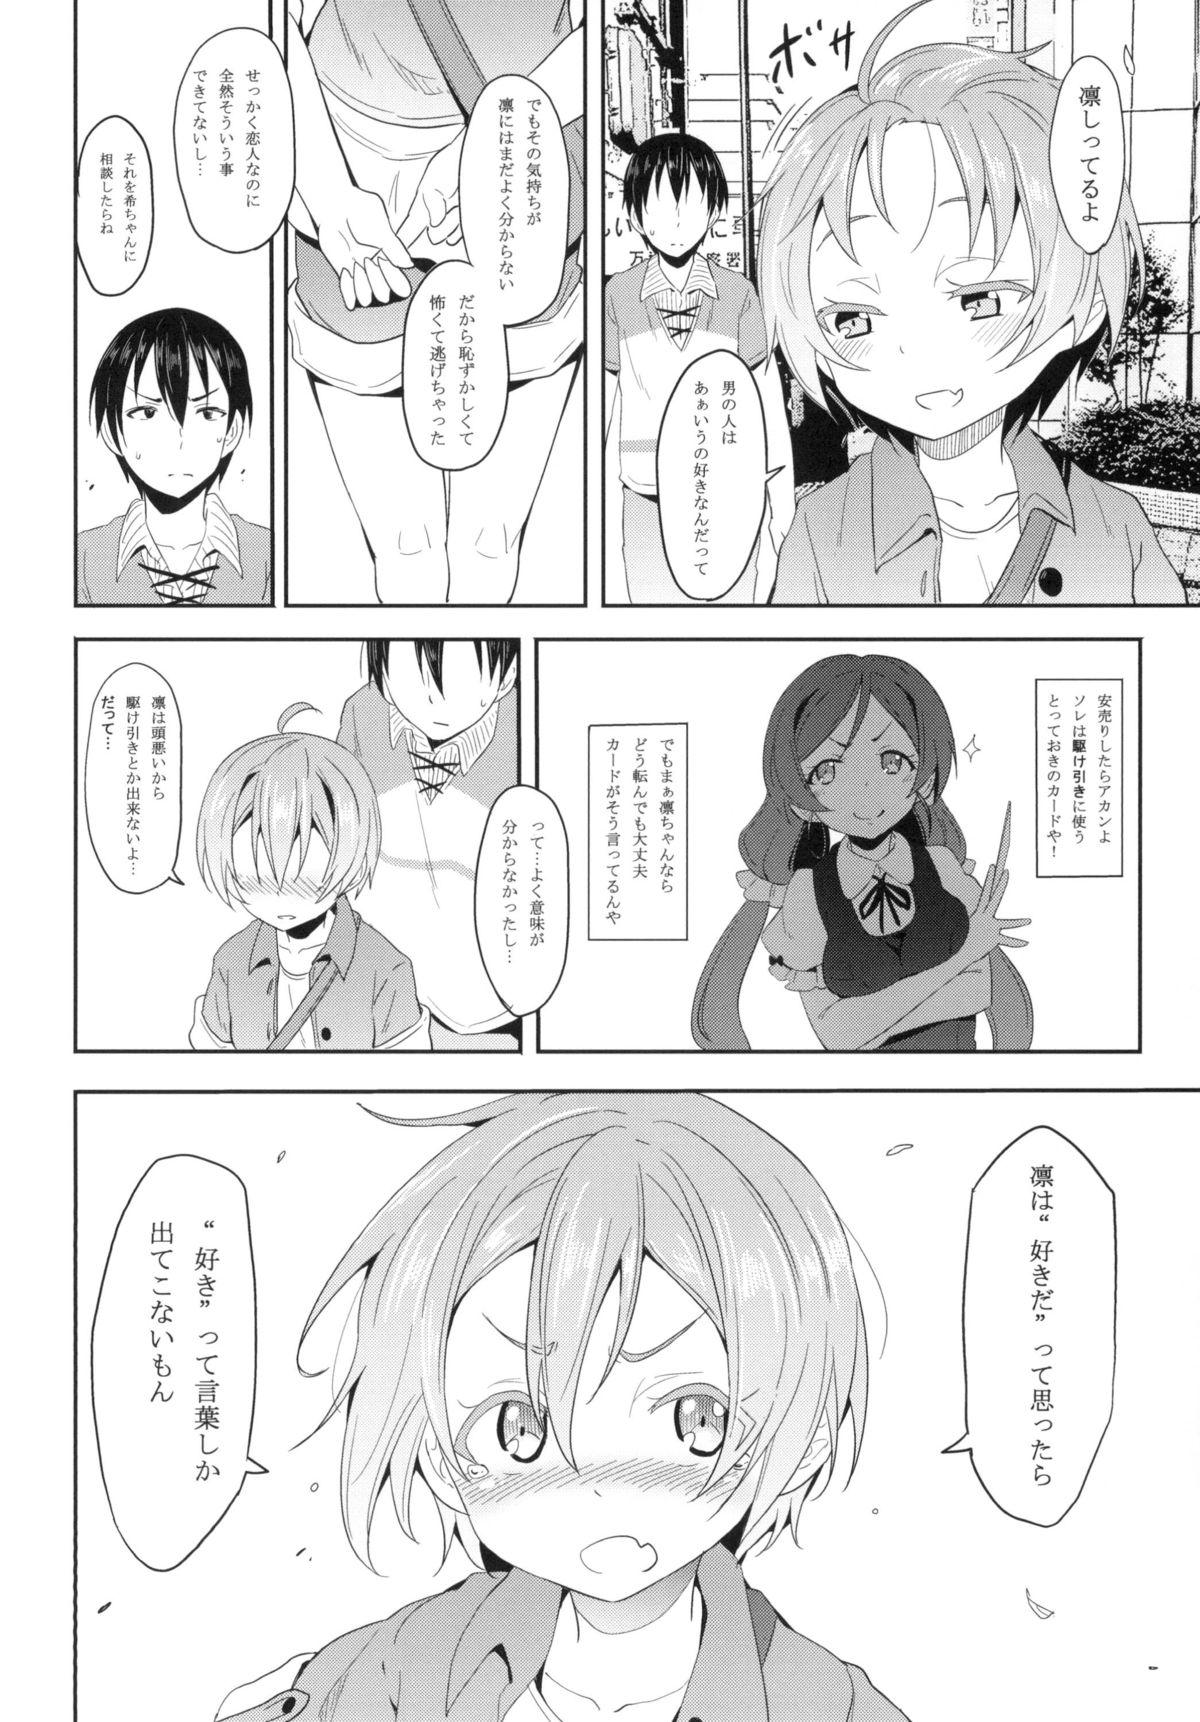 Consolo Rin-chan to Issho. - Love live Nice Ass - Page 6